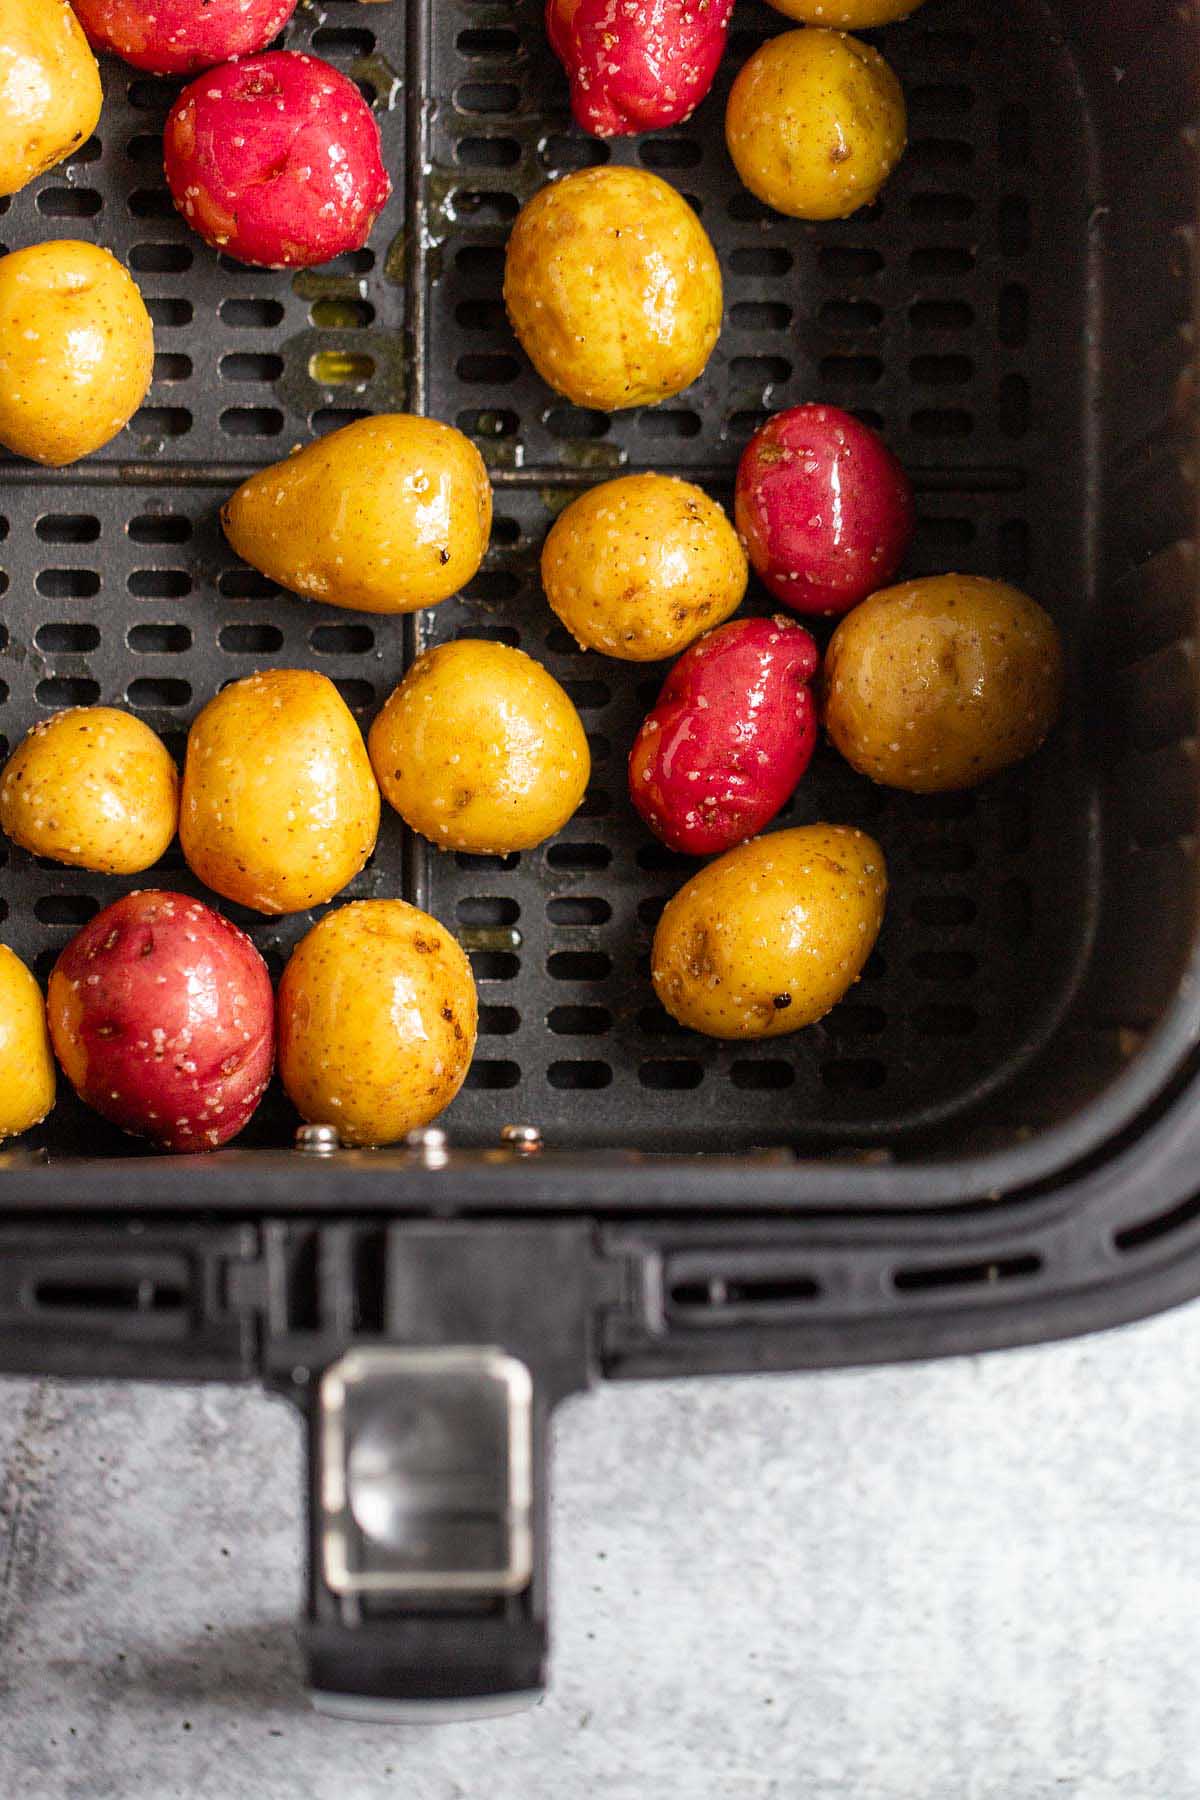 Baby potatoes in the air fryer.